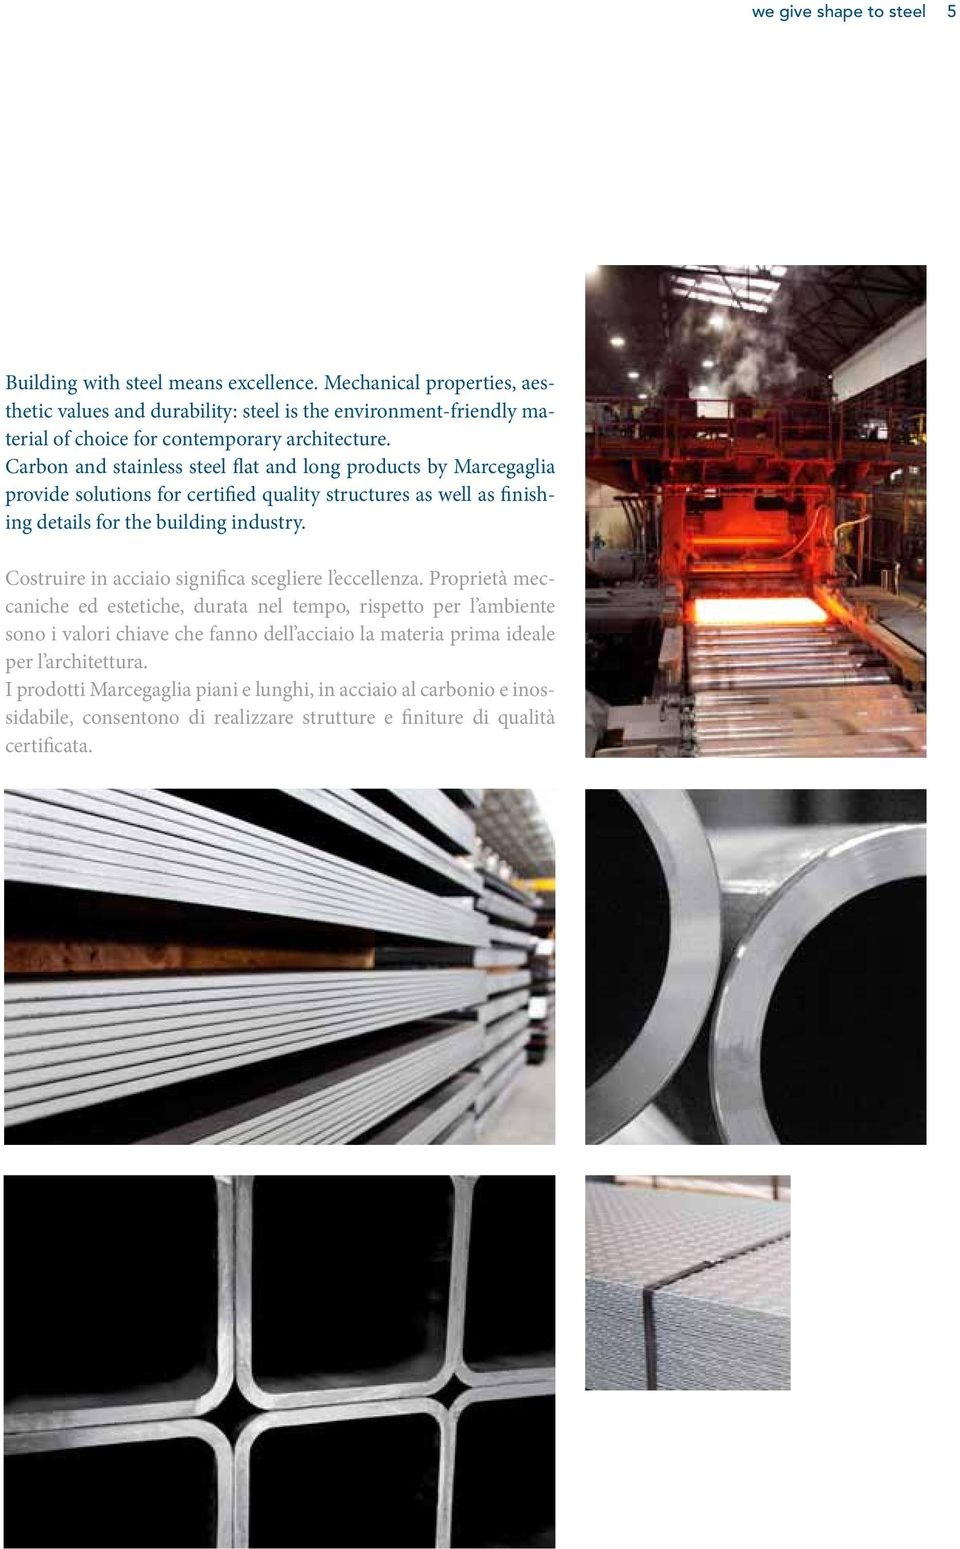 Carbon and stainless steel flat and long products by Marcegaglia provide solutions for certified quality structures as well as finishing details for the building industry.